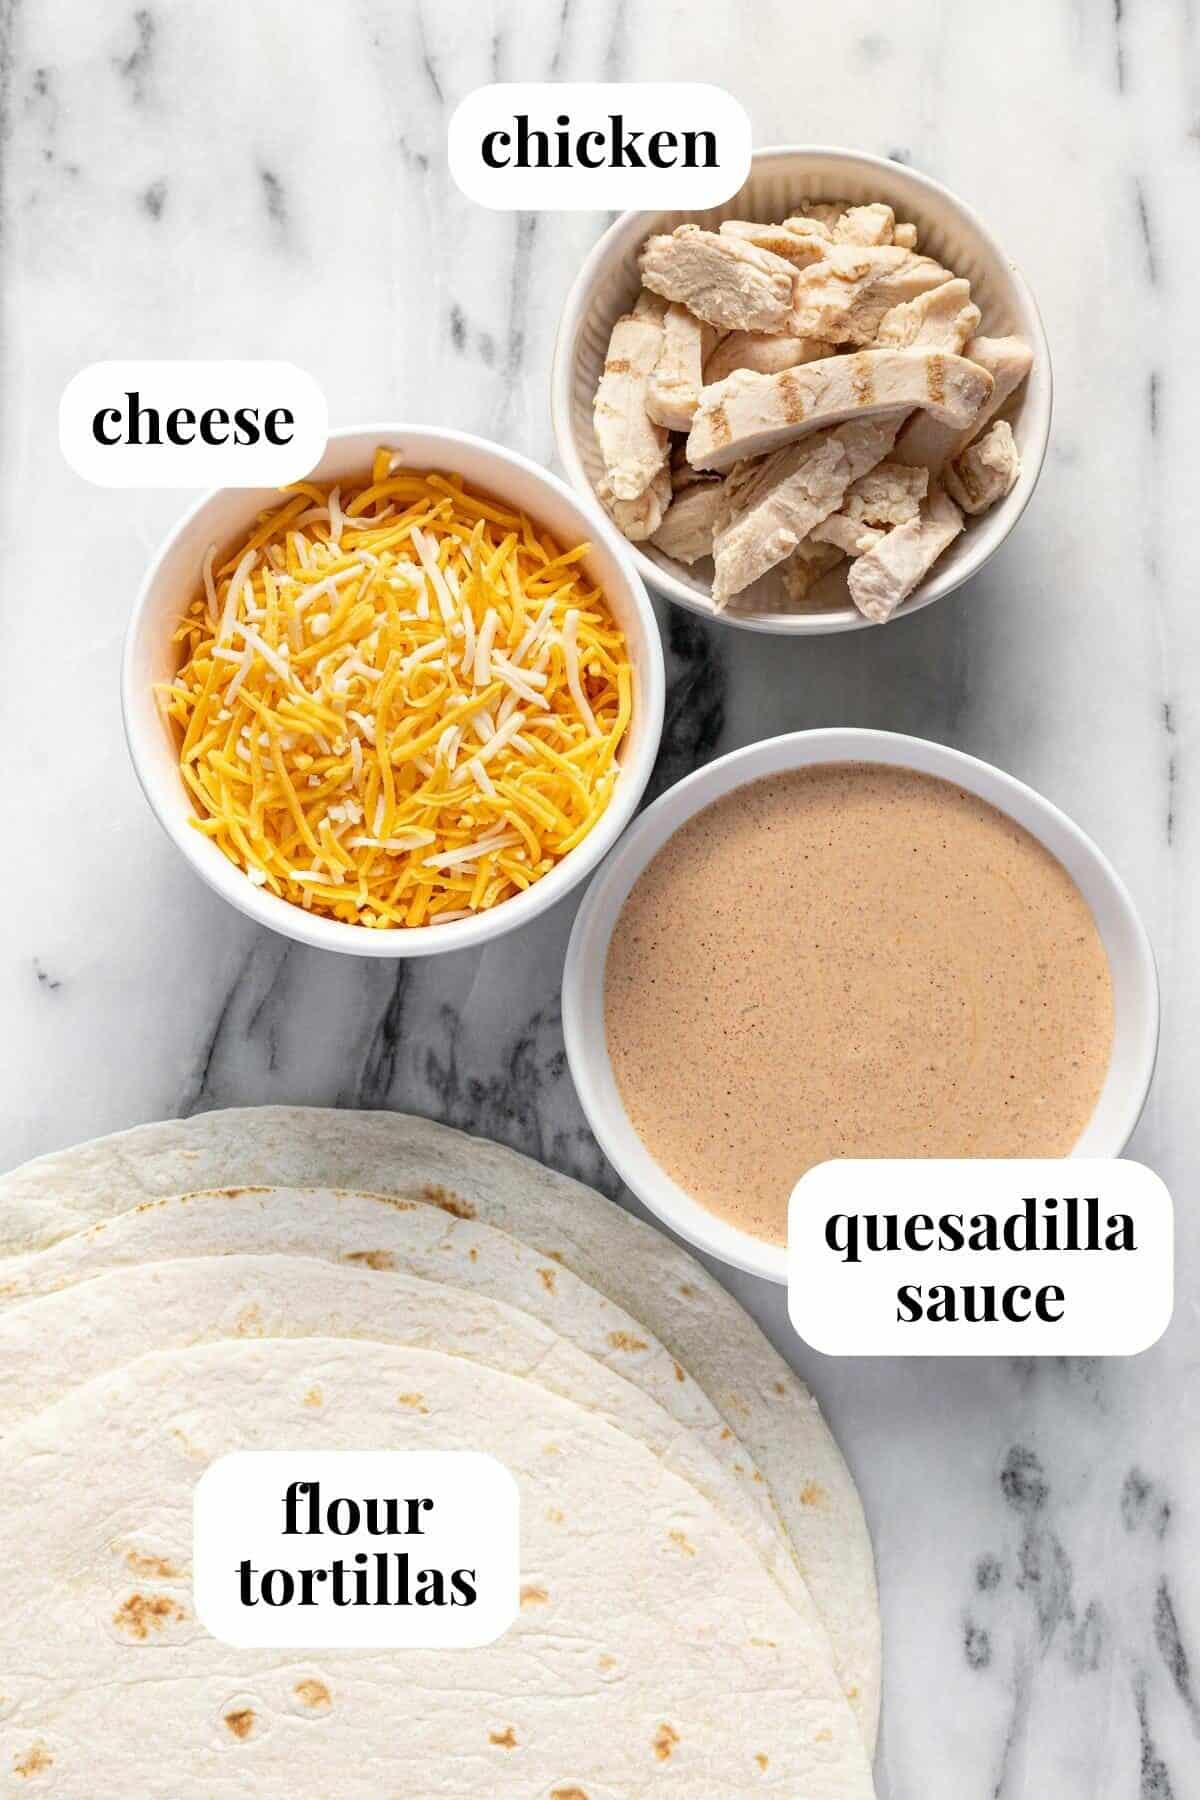 White marble counter top with bowls of ingredients to make chicken quesadillas.